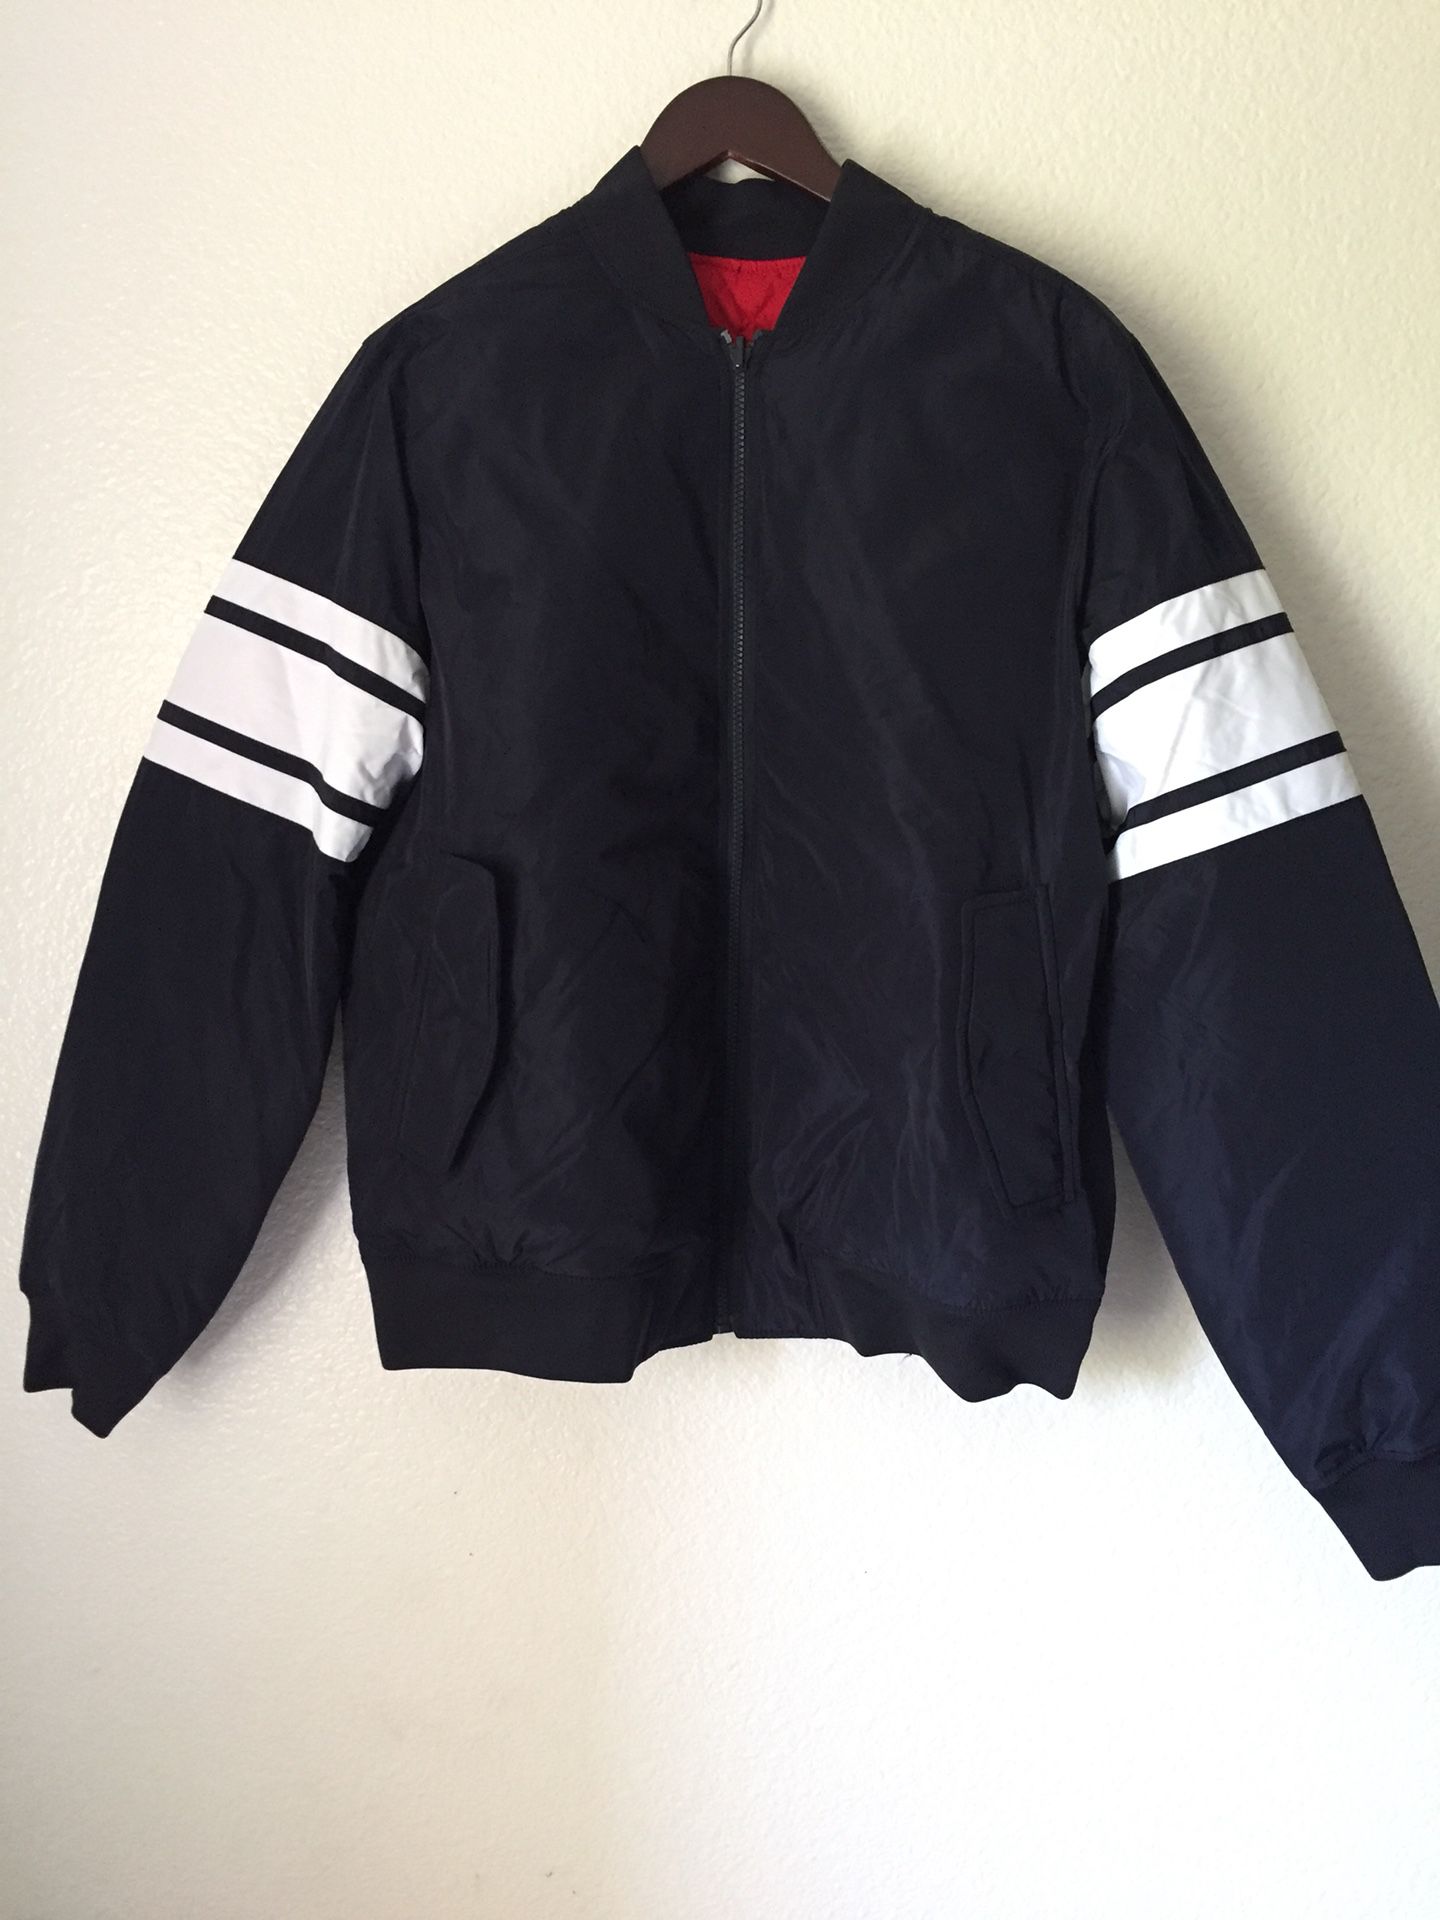 Email Overlappen analoog Tommy Hilfiger Summer Collection Navy Blue Bomber Jacket! (Reversible)  Never worn w/ Tags Selling retail for 169.99 Offer price $110.00 or best o  for Sale in Riverside, CA - OfferUp